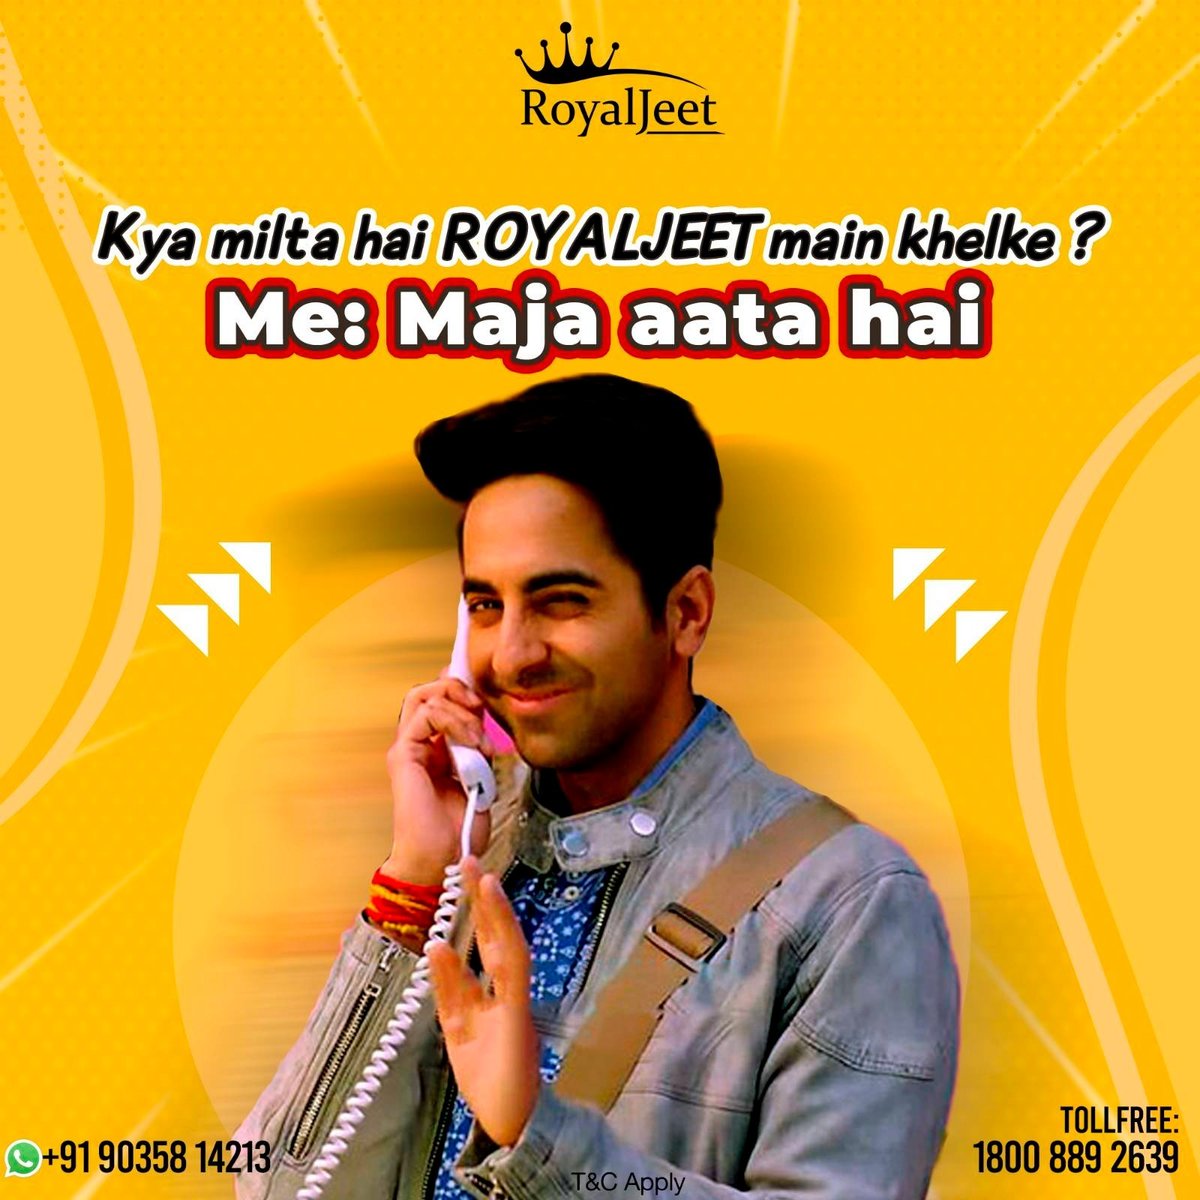 Tag your friend in comment section and invite them to play at ROYALJEET

#royaljeet #rummy #onlinegames #poker #ipl #earnmoney #football #rummygame #onlinerummy #cards #ludo #playingcards #gambling #money #rummyonline #betting #casinoindia #bettingexpert #sportsbetting #sports